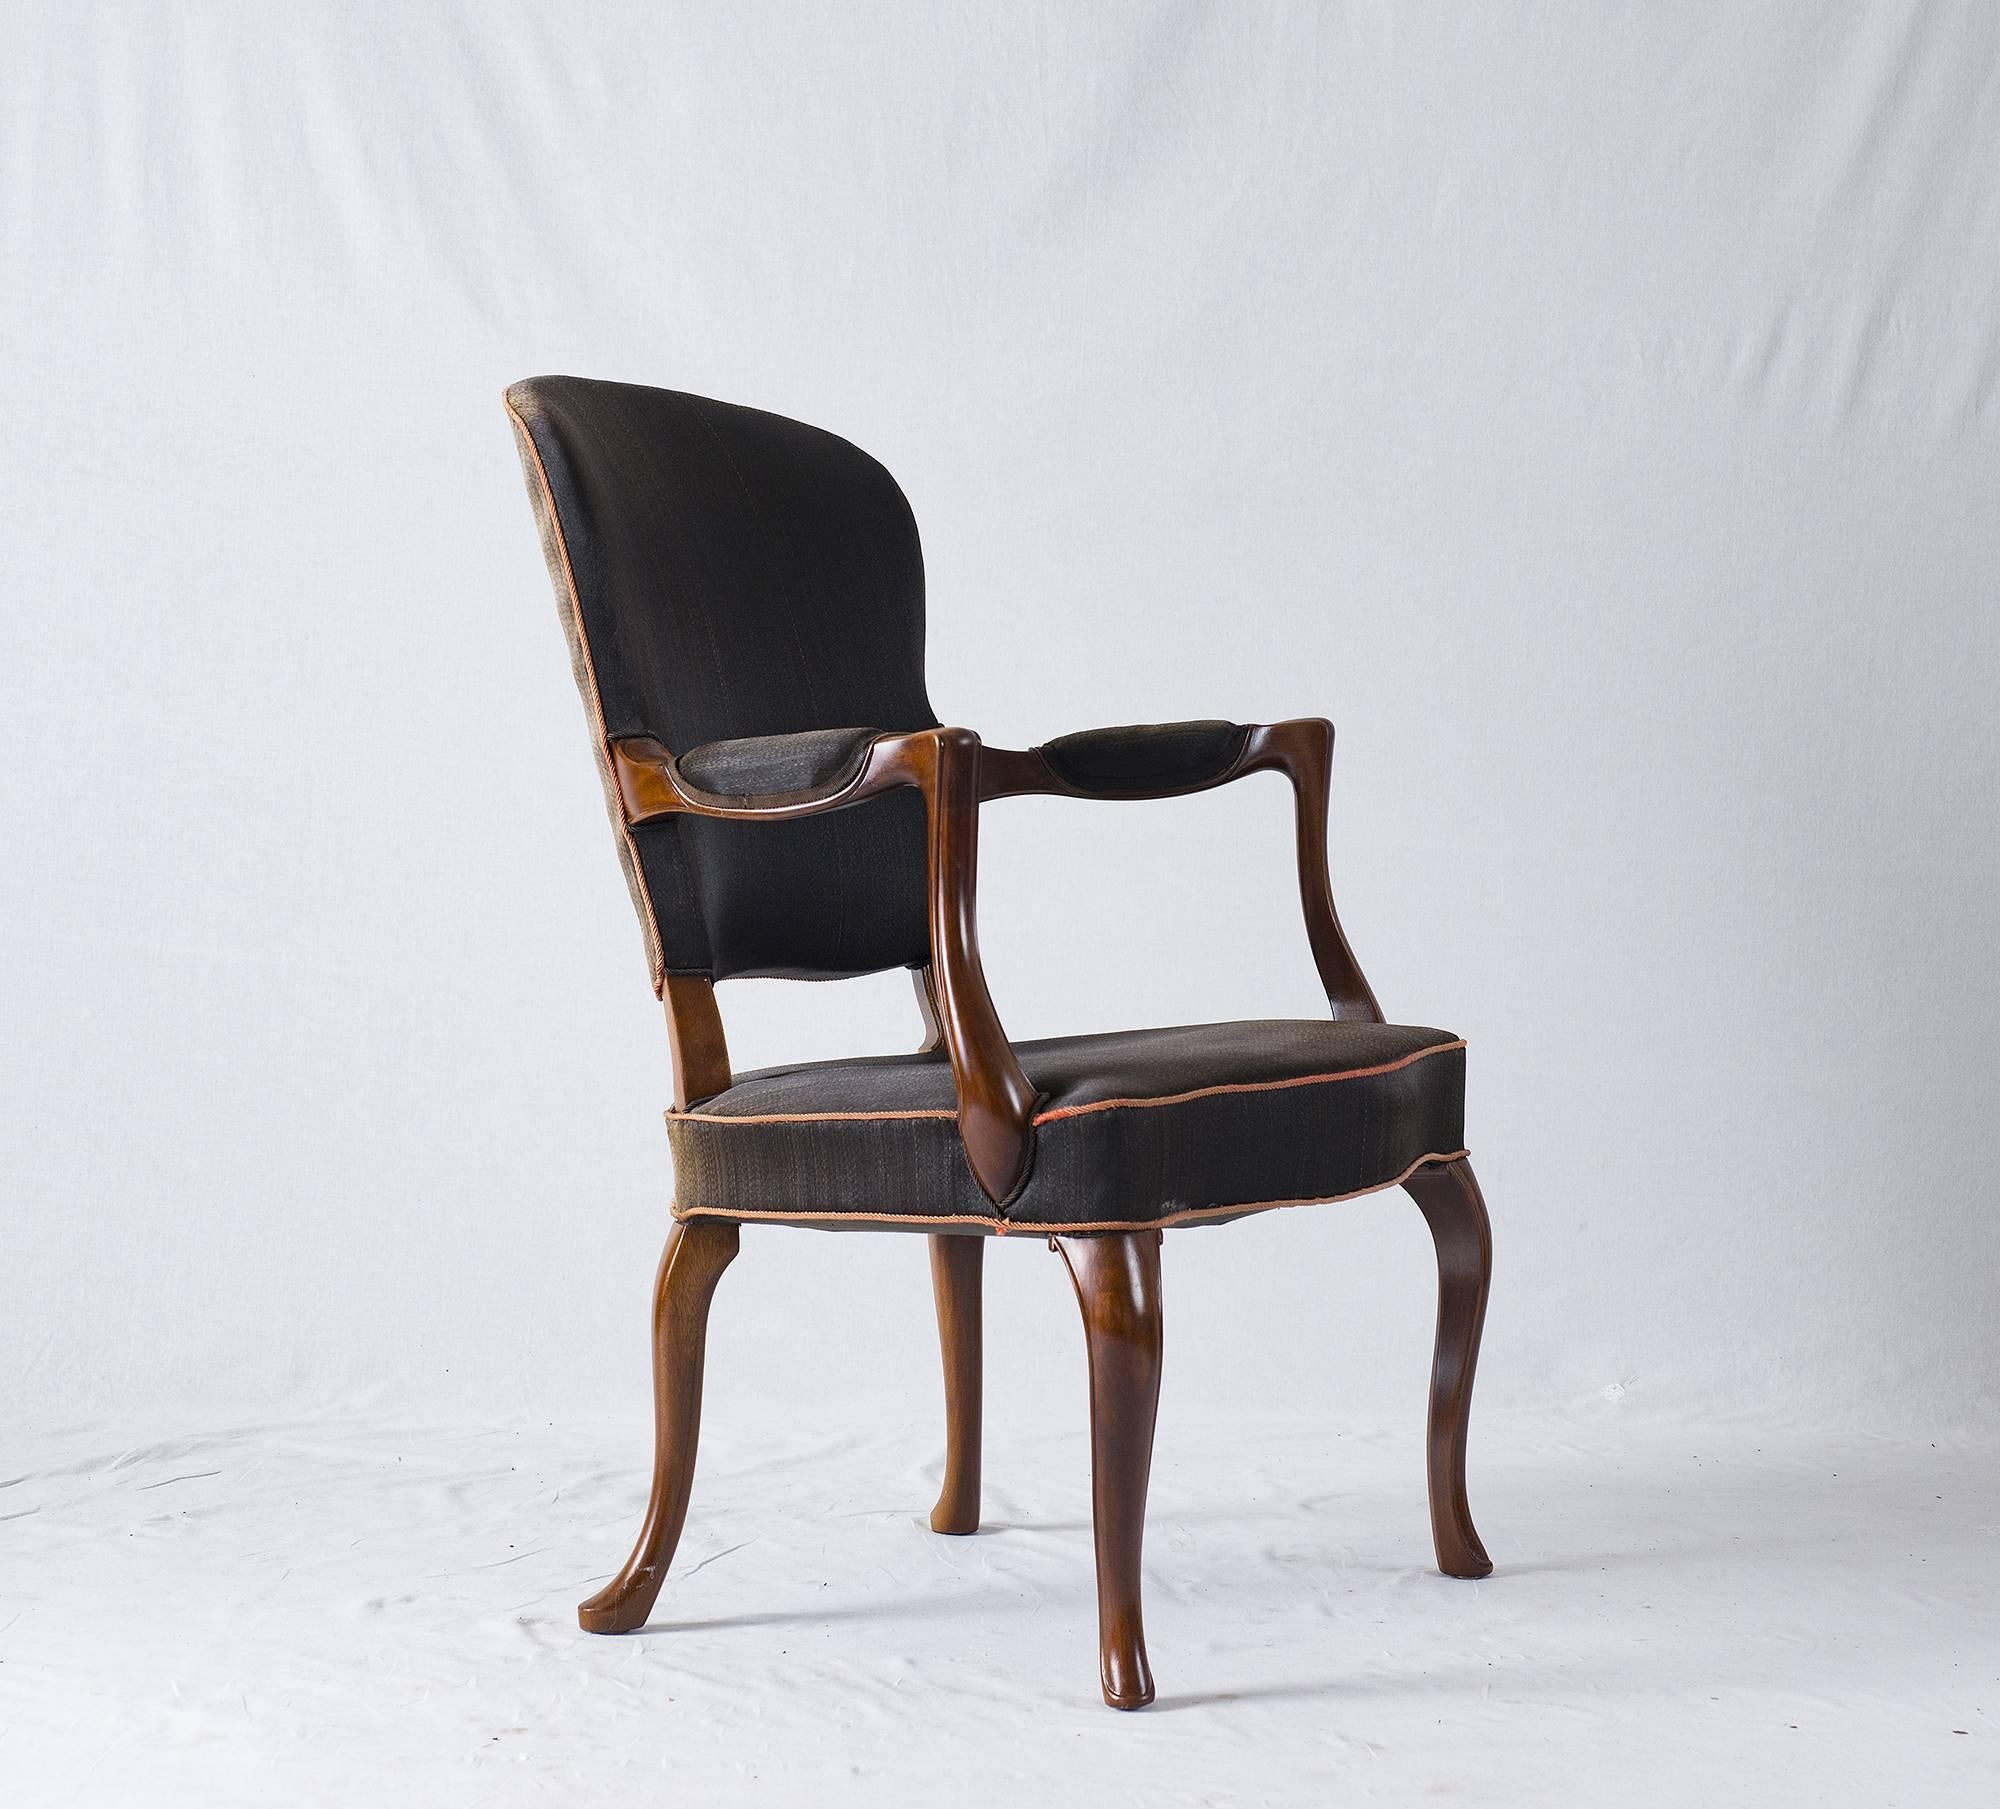 Frits Henningsen armchair with original horsehair upholstery.